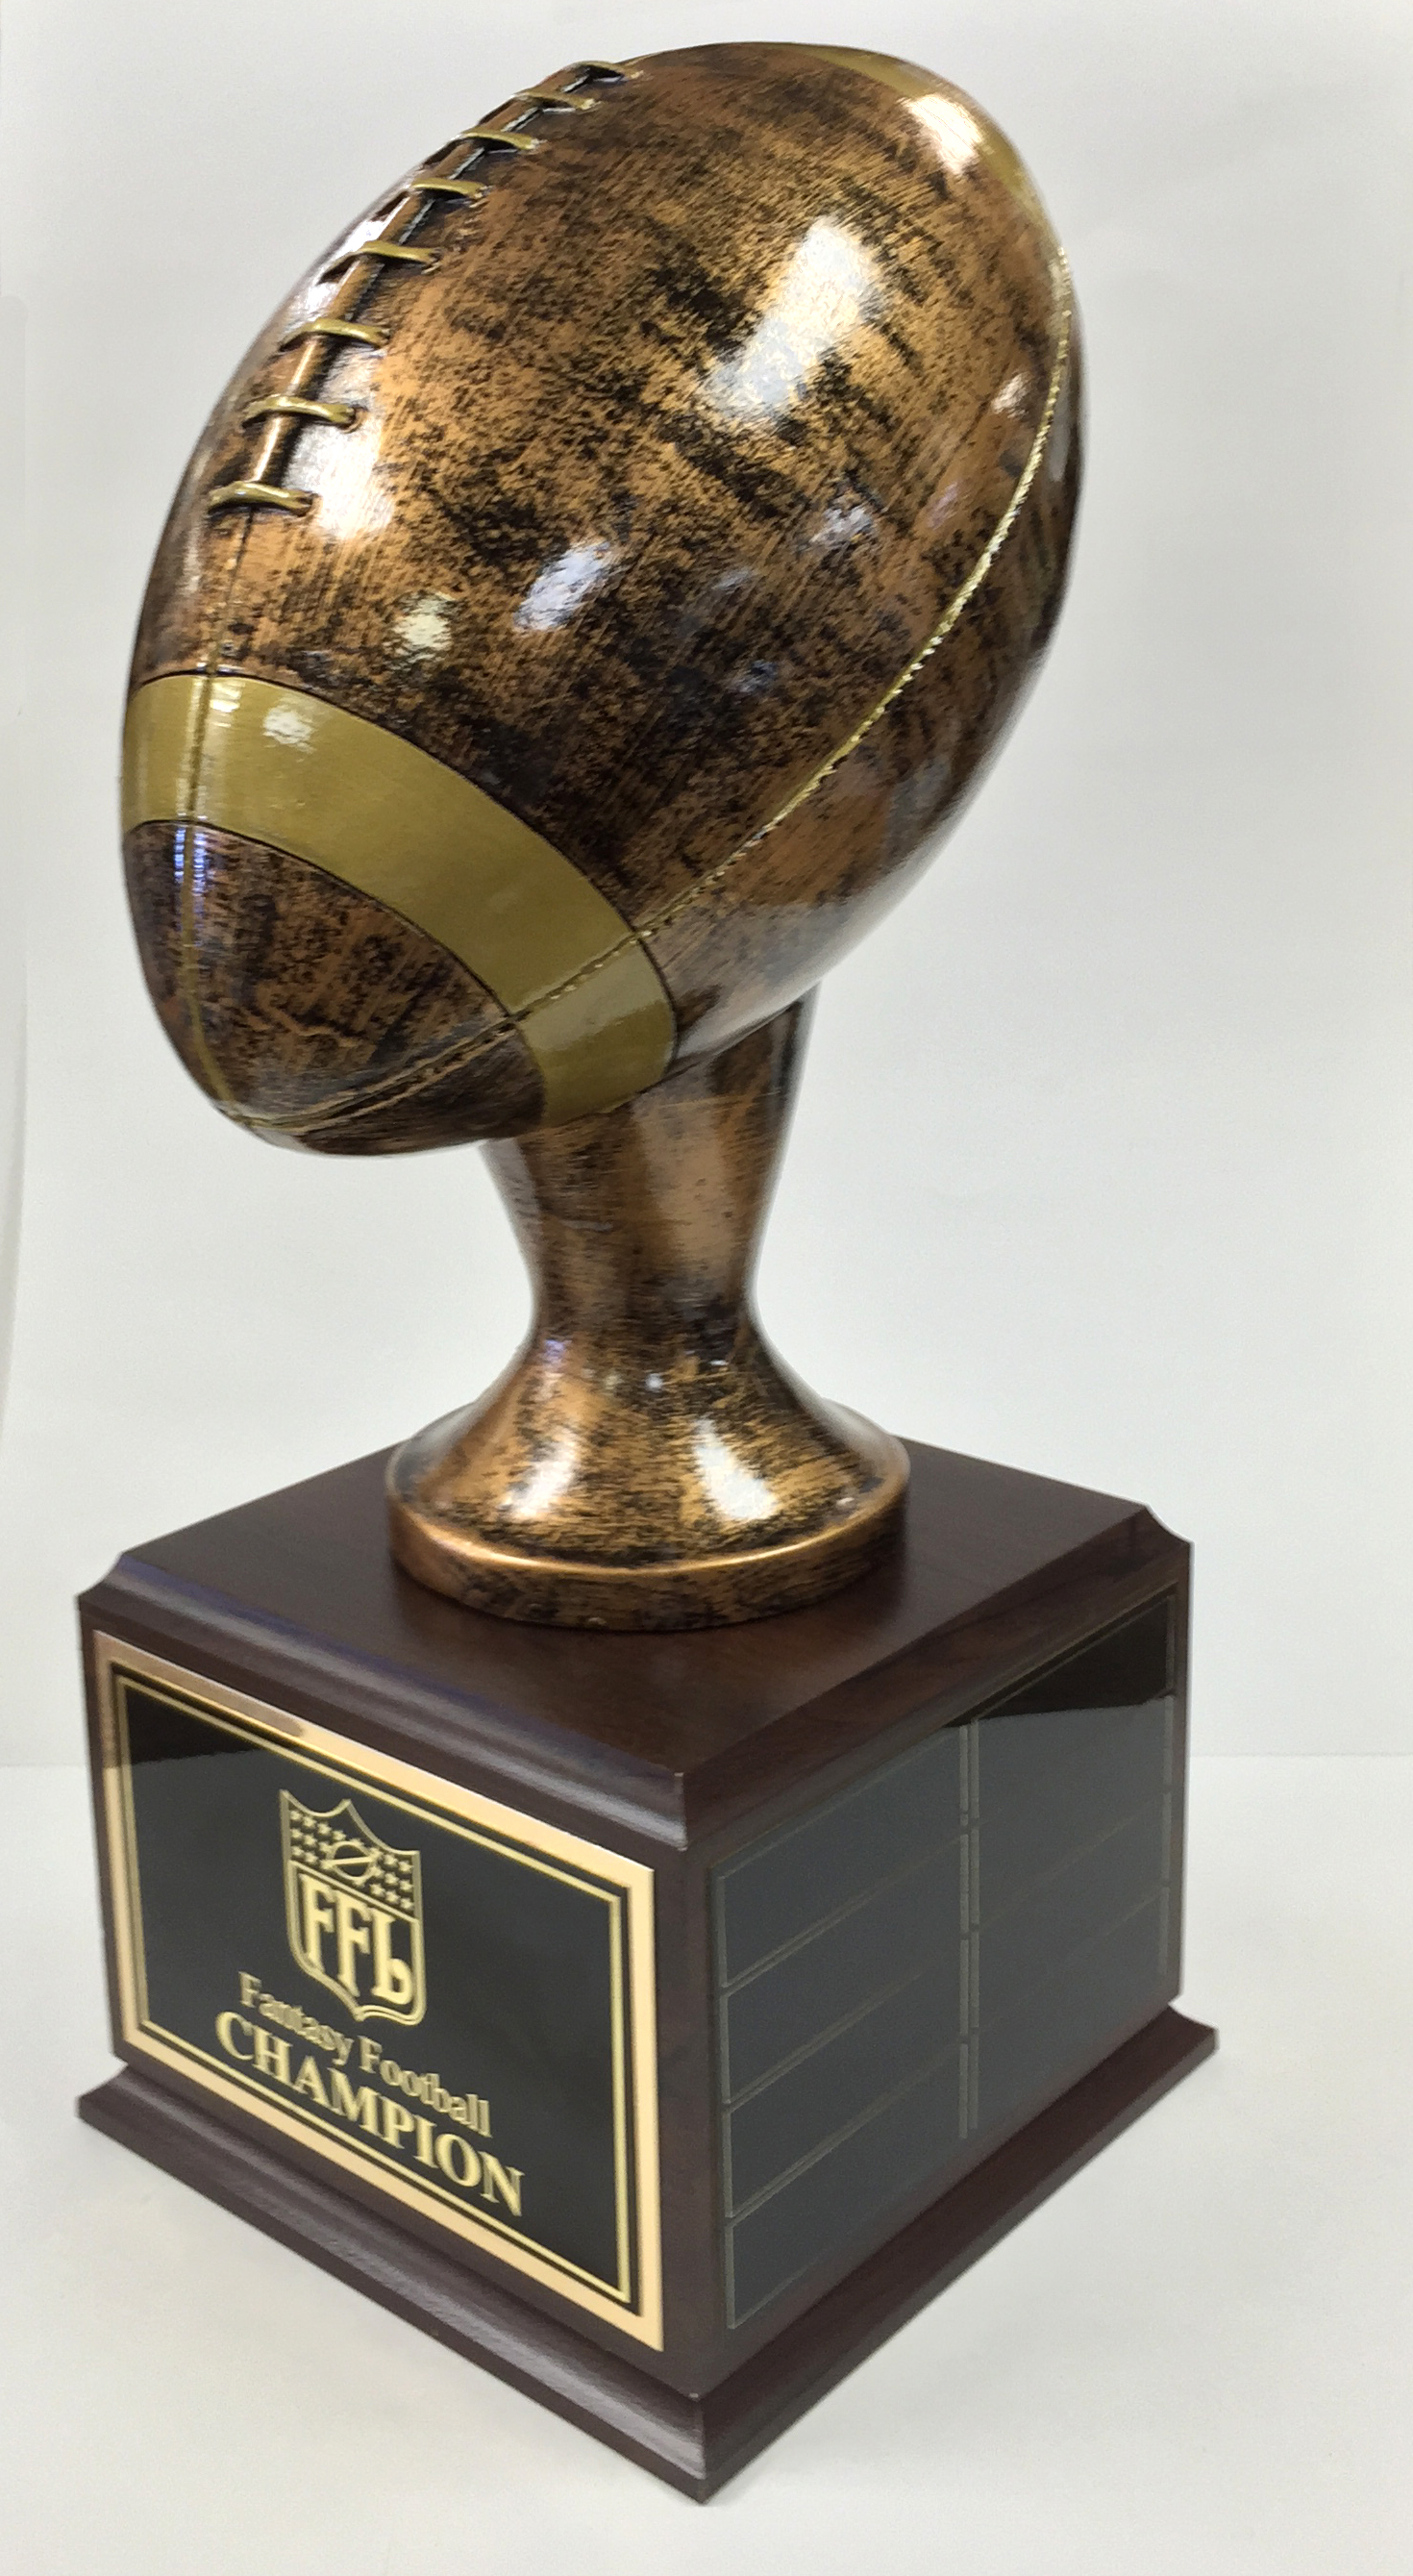 31cm Tower Football Trophy Award Antique Gold 12.25 Inch ,Free p&p & Engraving